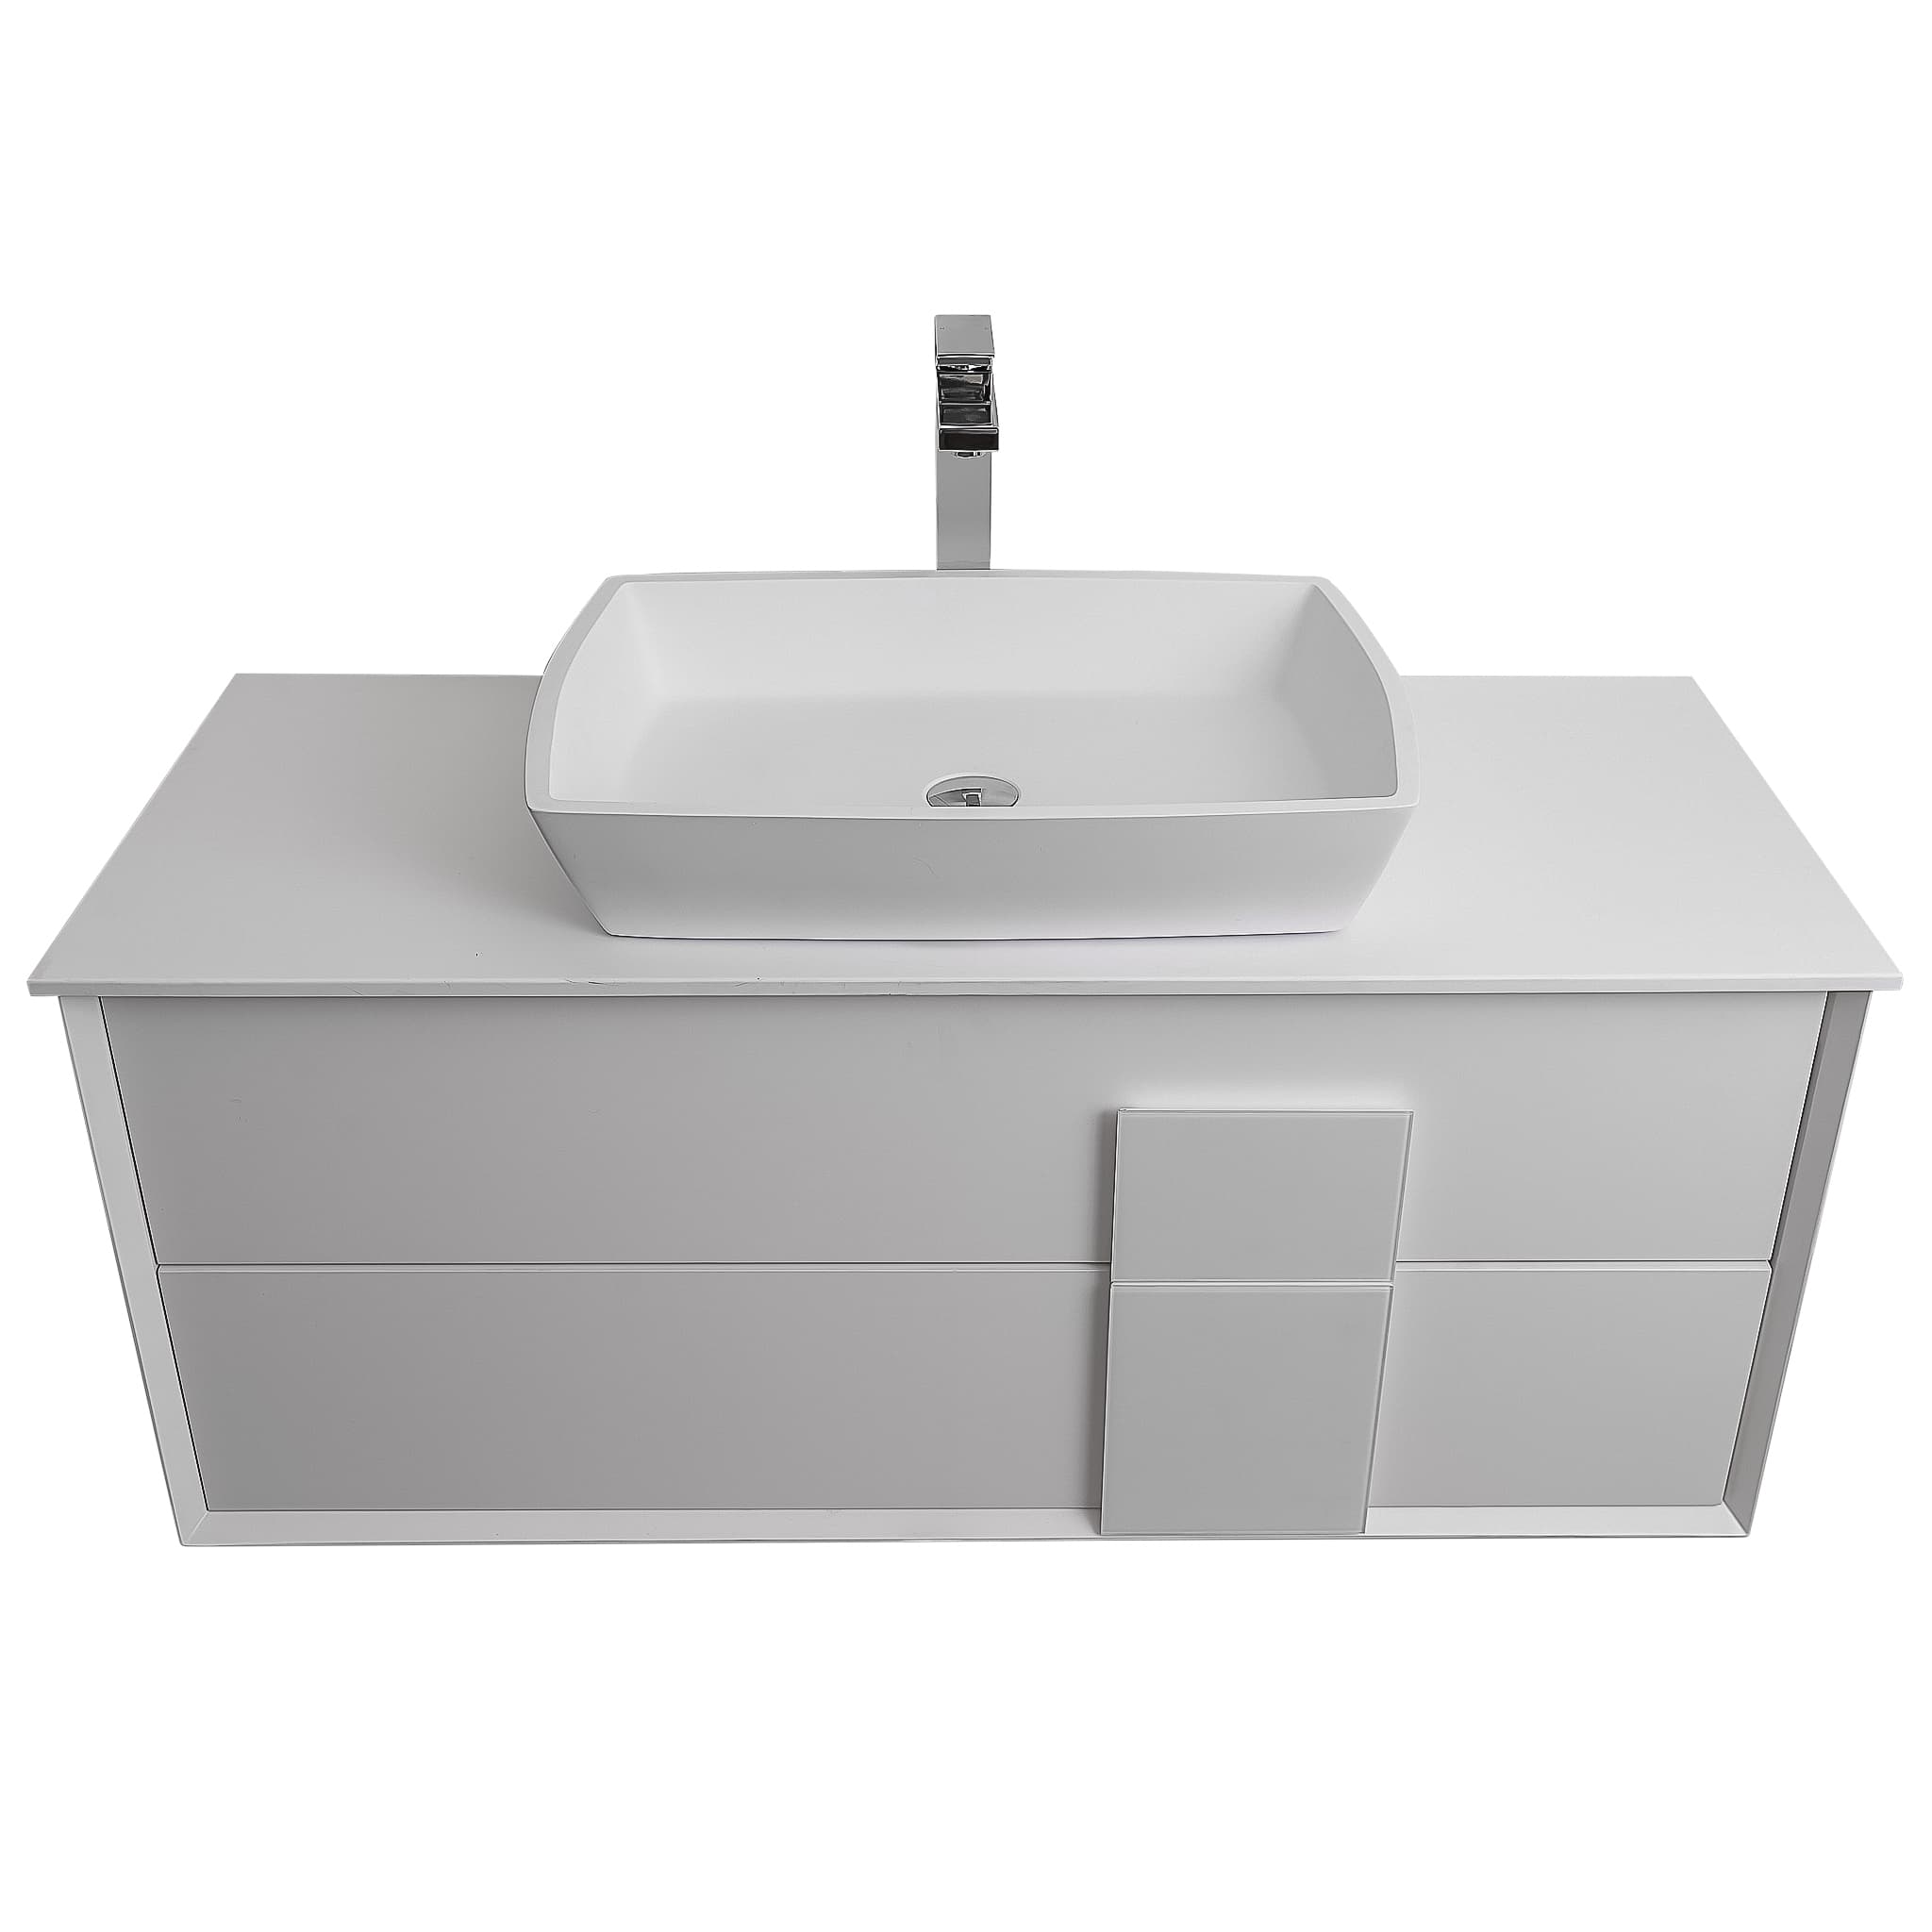 Piazza 47.5 Matte White With White Handle Cabinet, Solid Surface Flat White Counter and Square Solid Surface White Basin 1316, Wall Mounted Modern Vanity Set